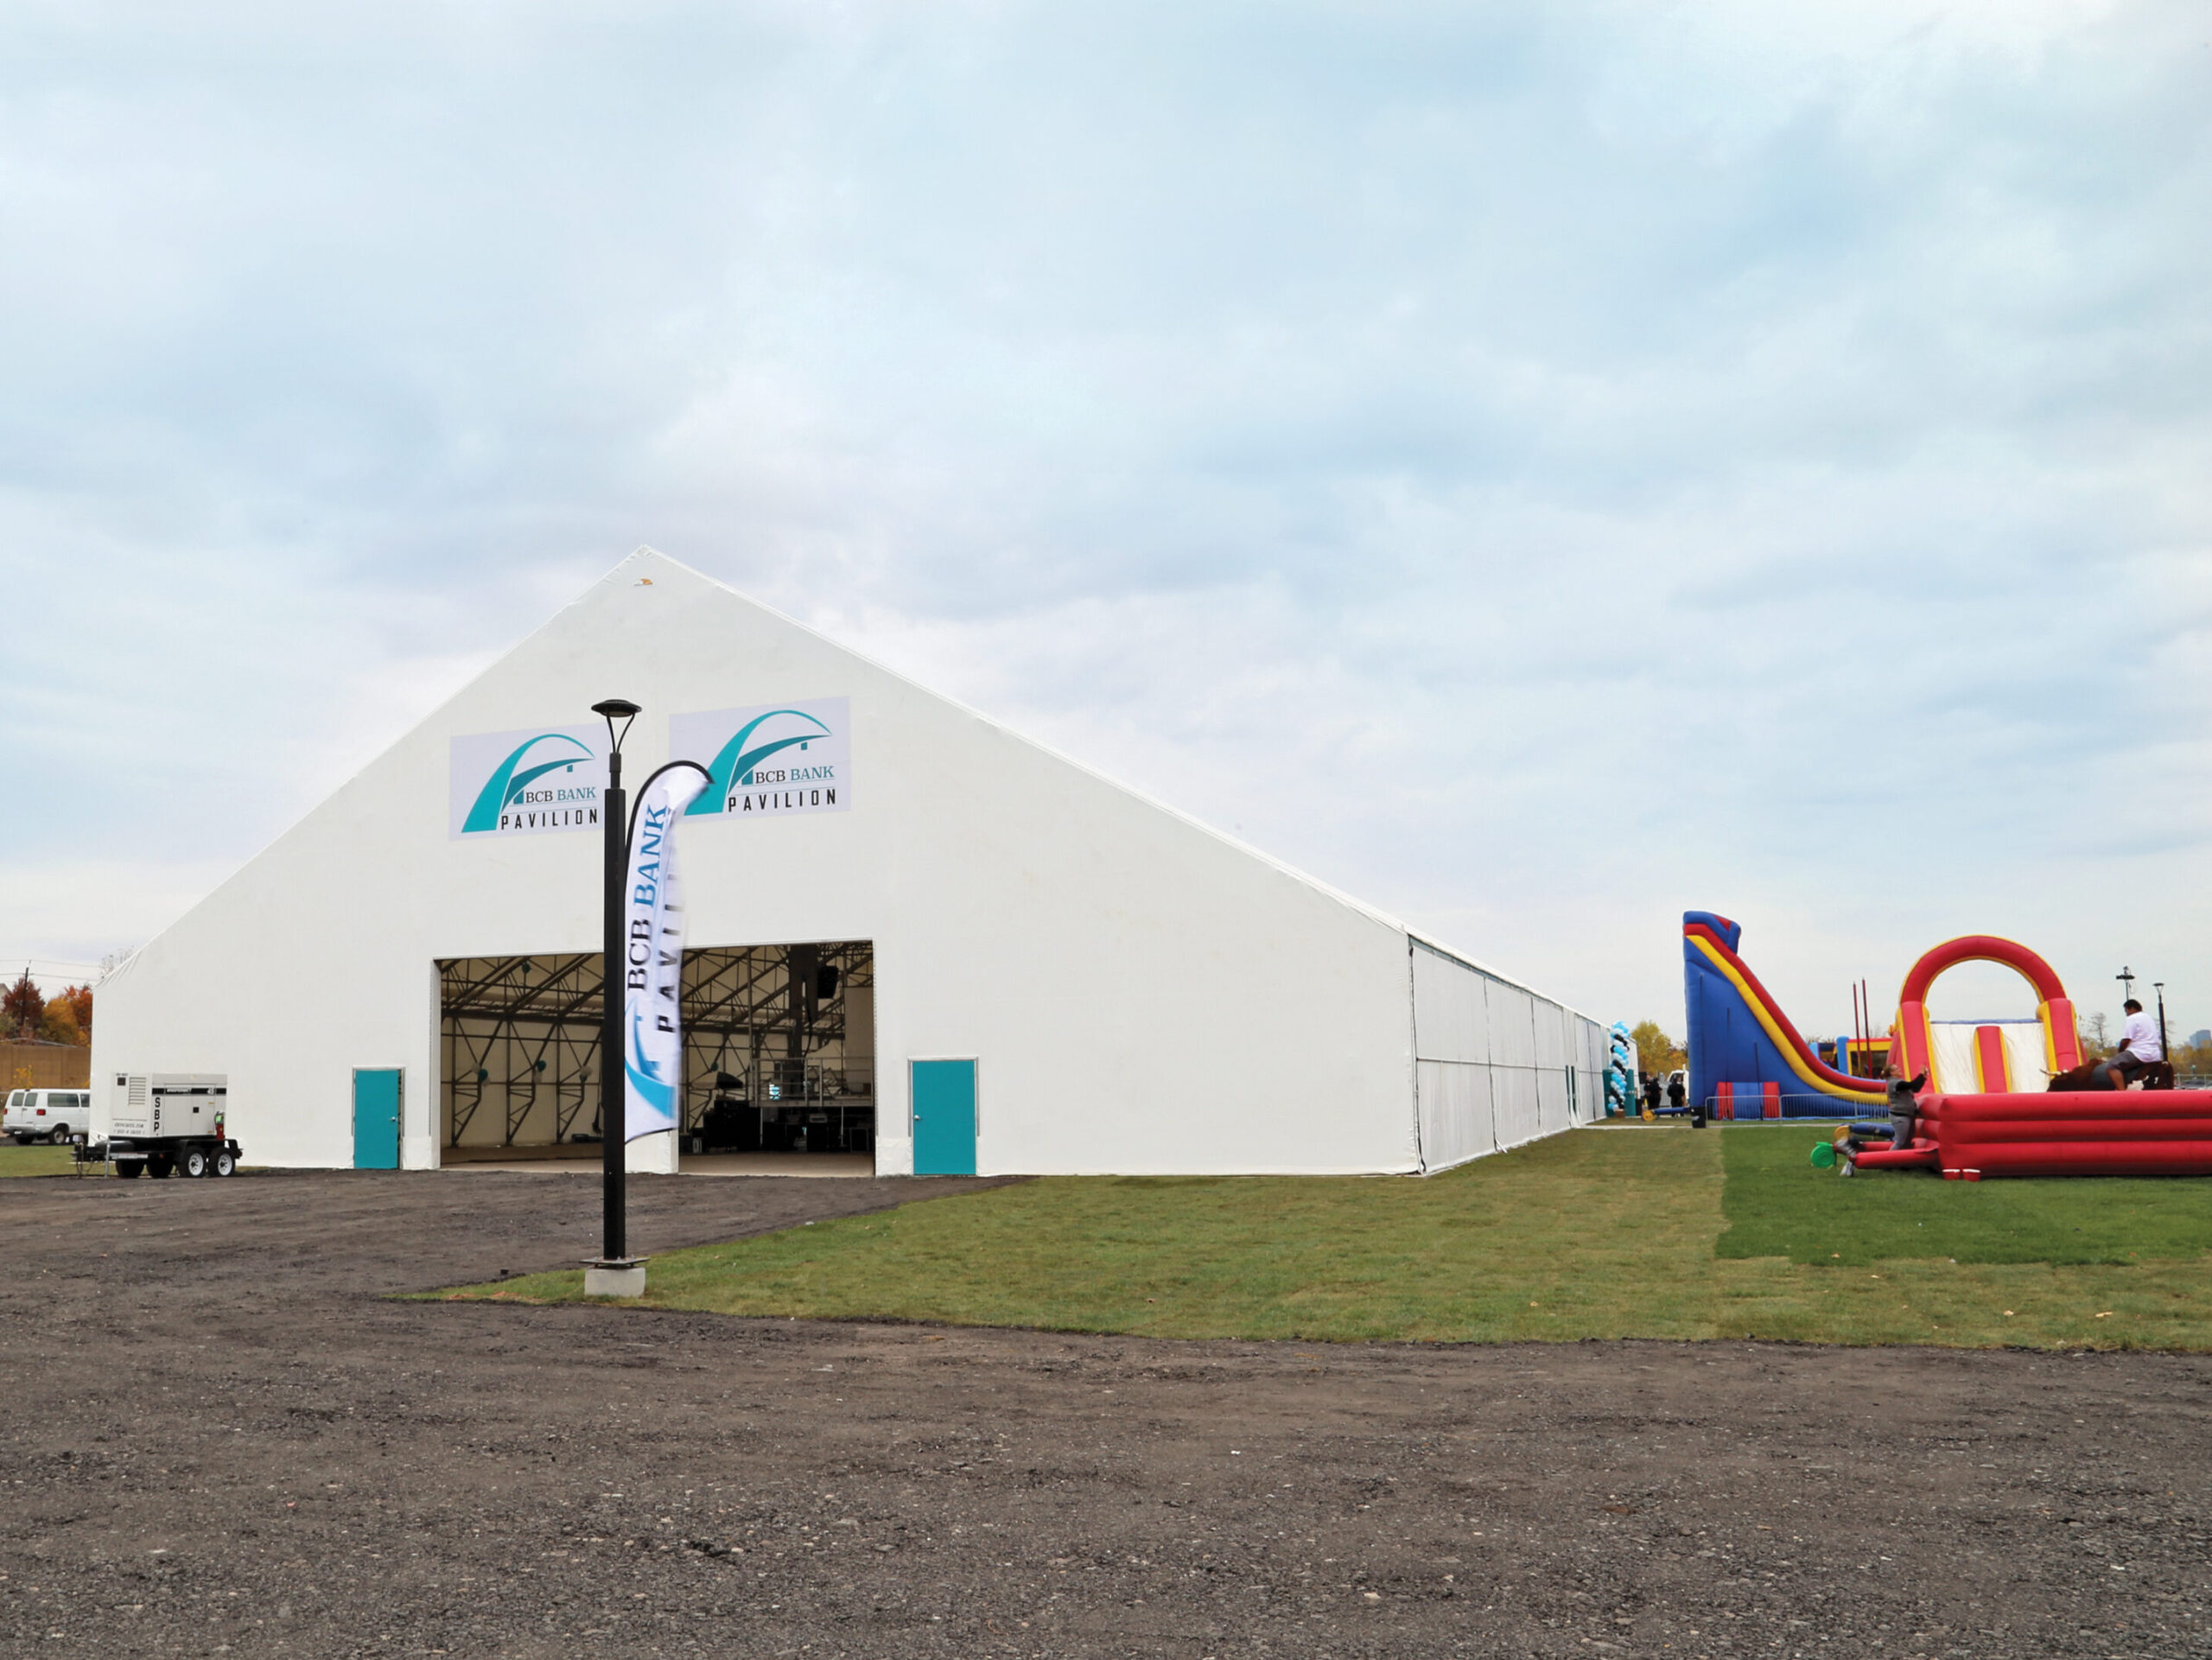 exterior of event space with bounce house